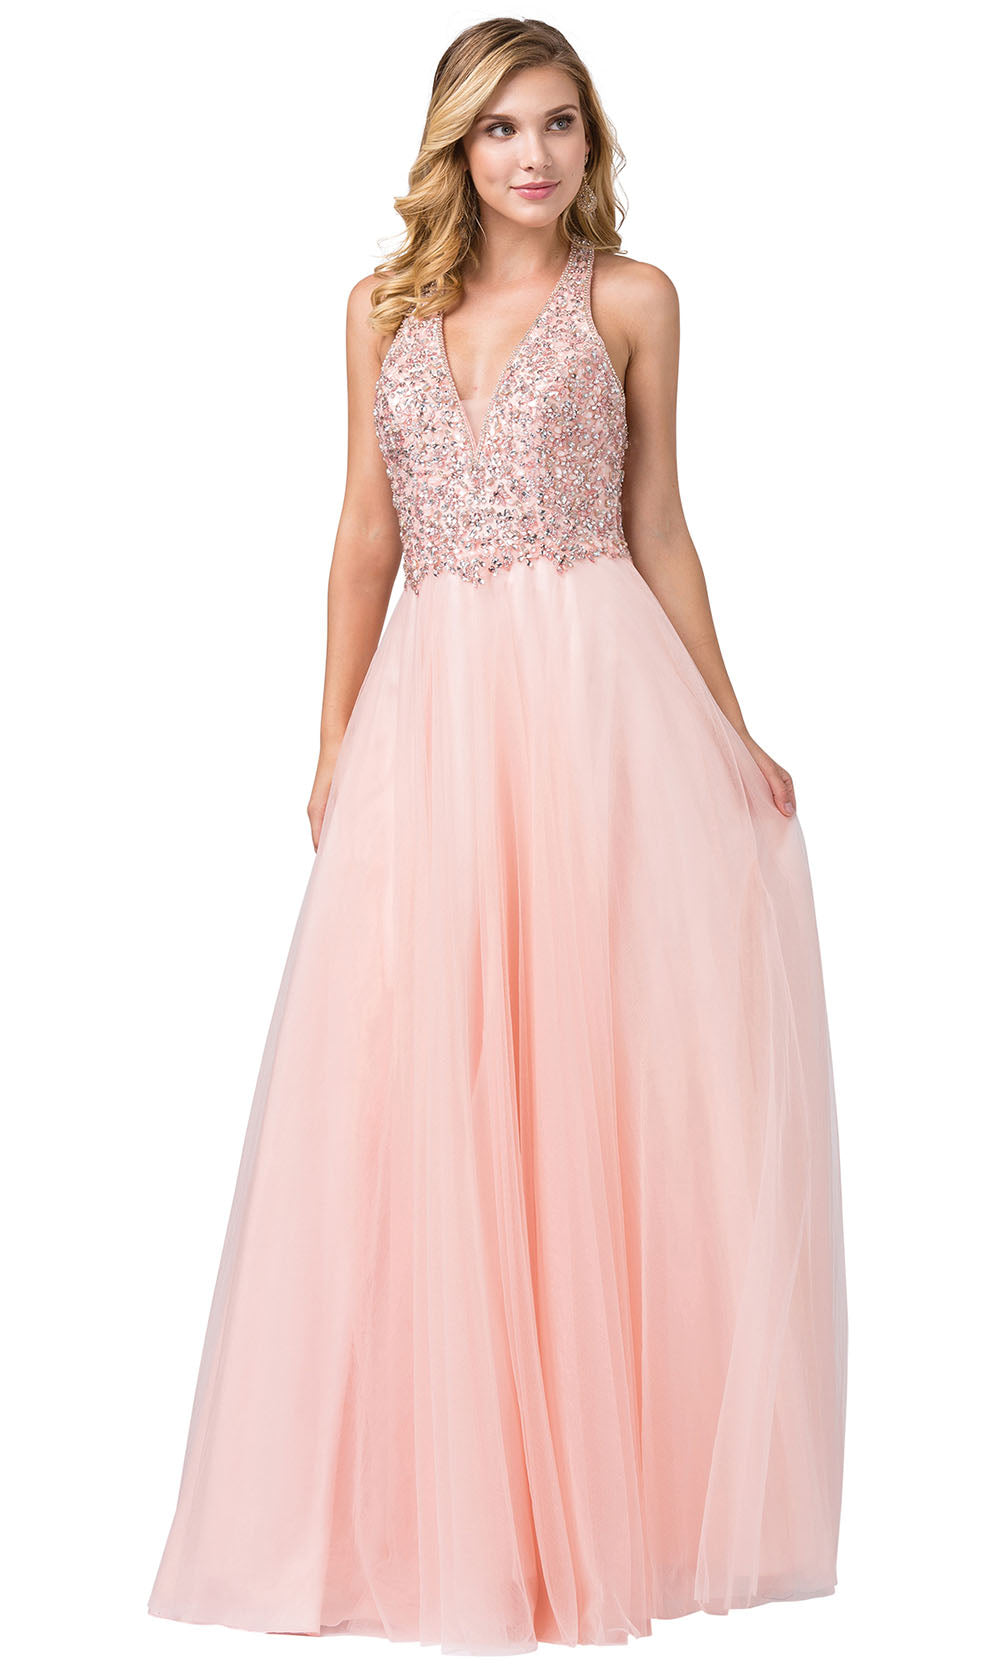 Dancing Queen - 2532 Embellished Deep V Neck A-Line Gown In Pink